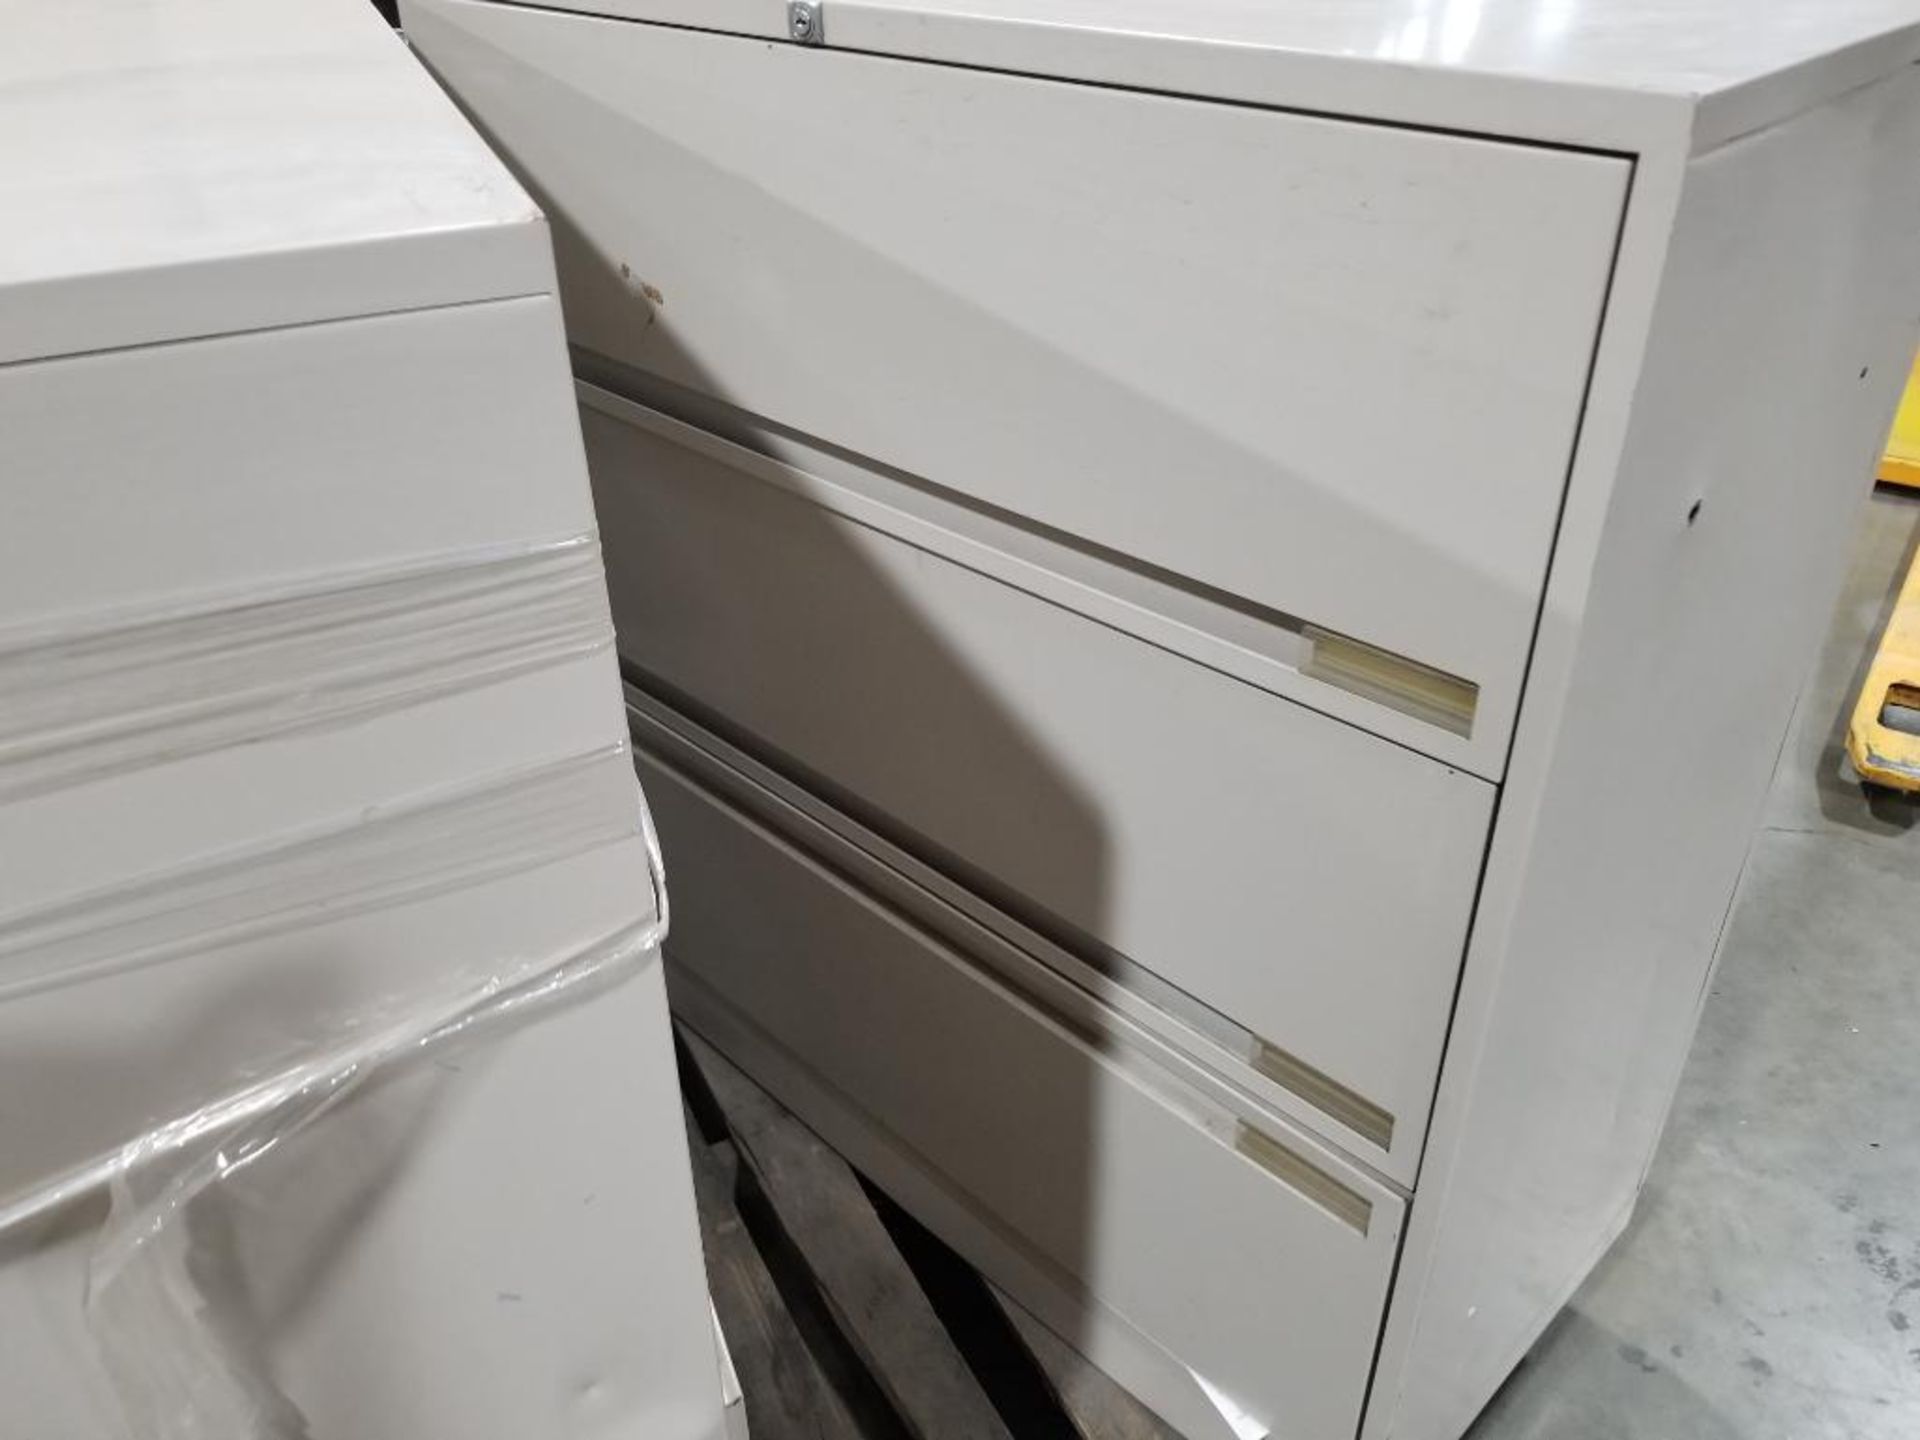 Qty 2 - Filing cabinets. - Image 2 of 9